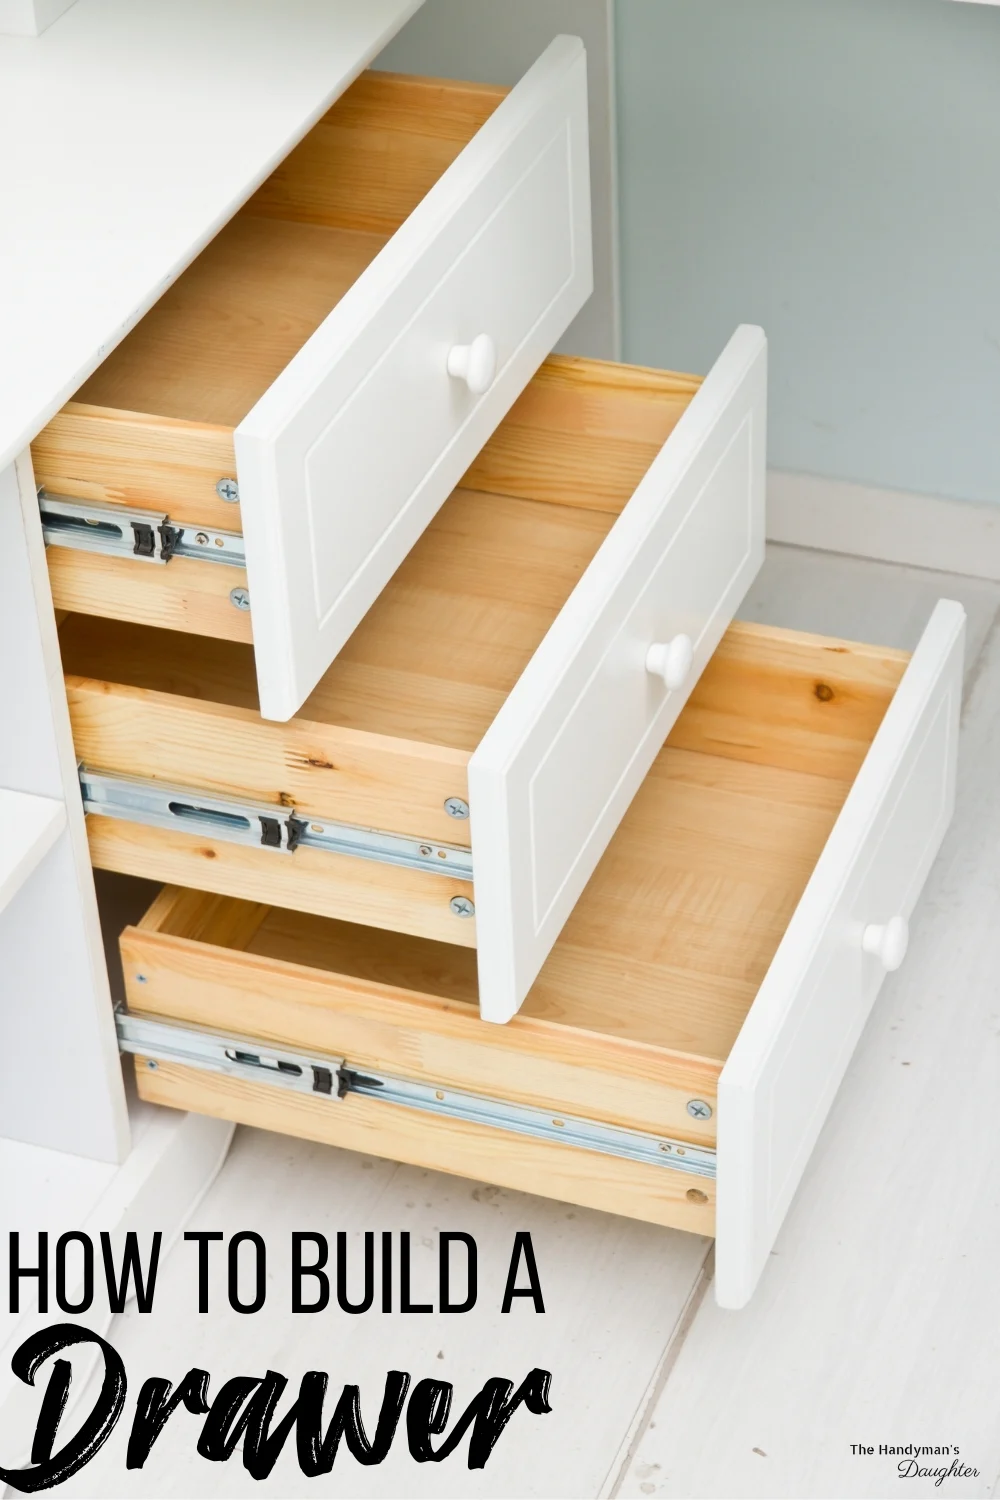 what plywood to use for drawers?